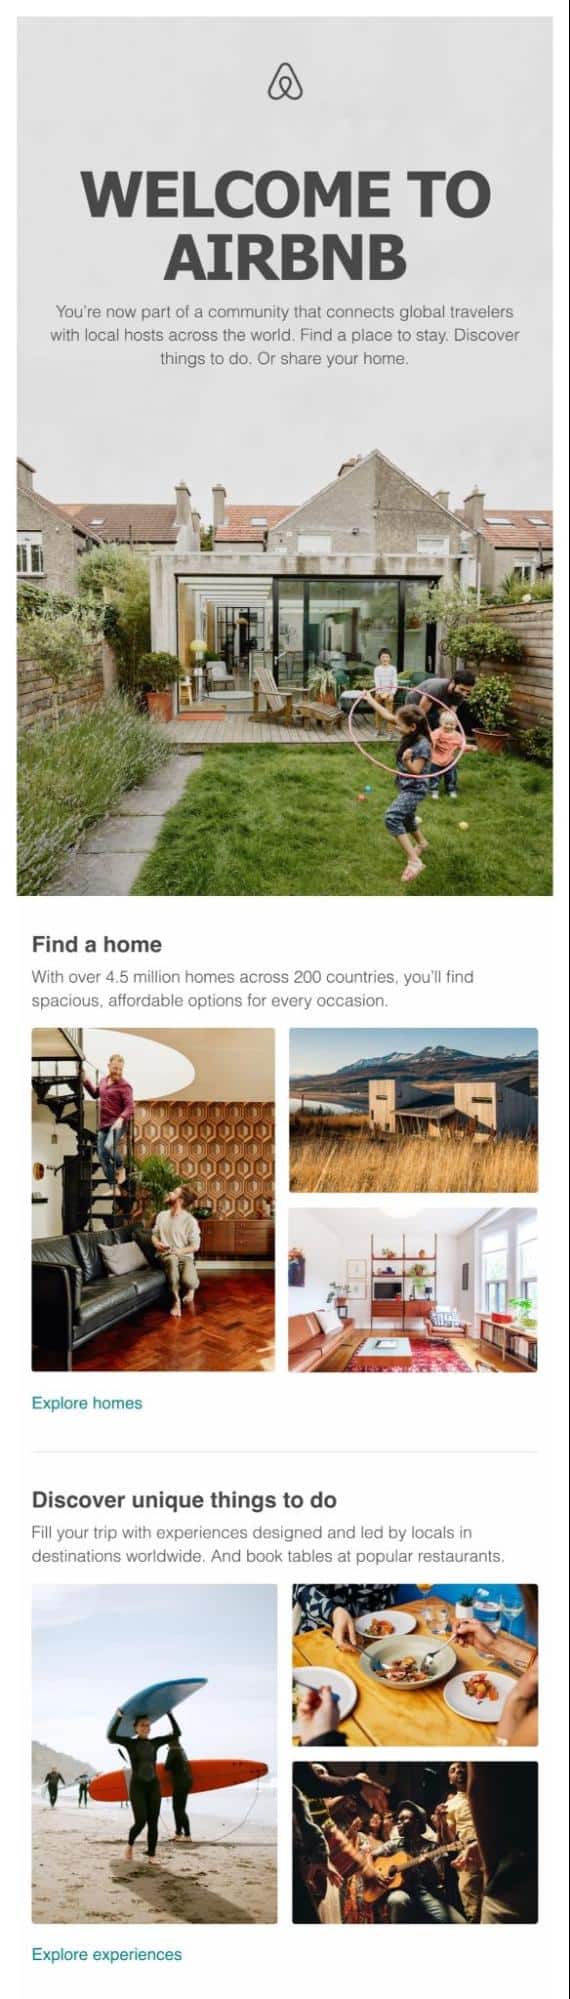 Airbnb's welcome email